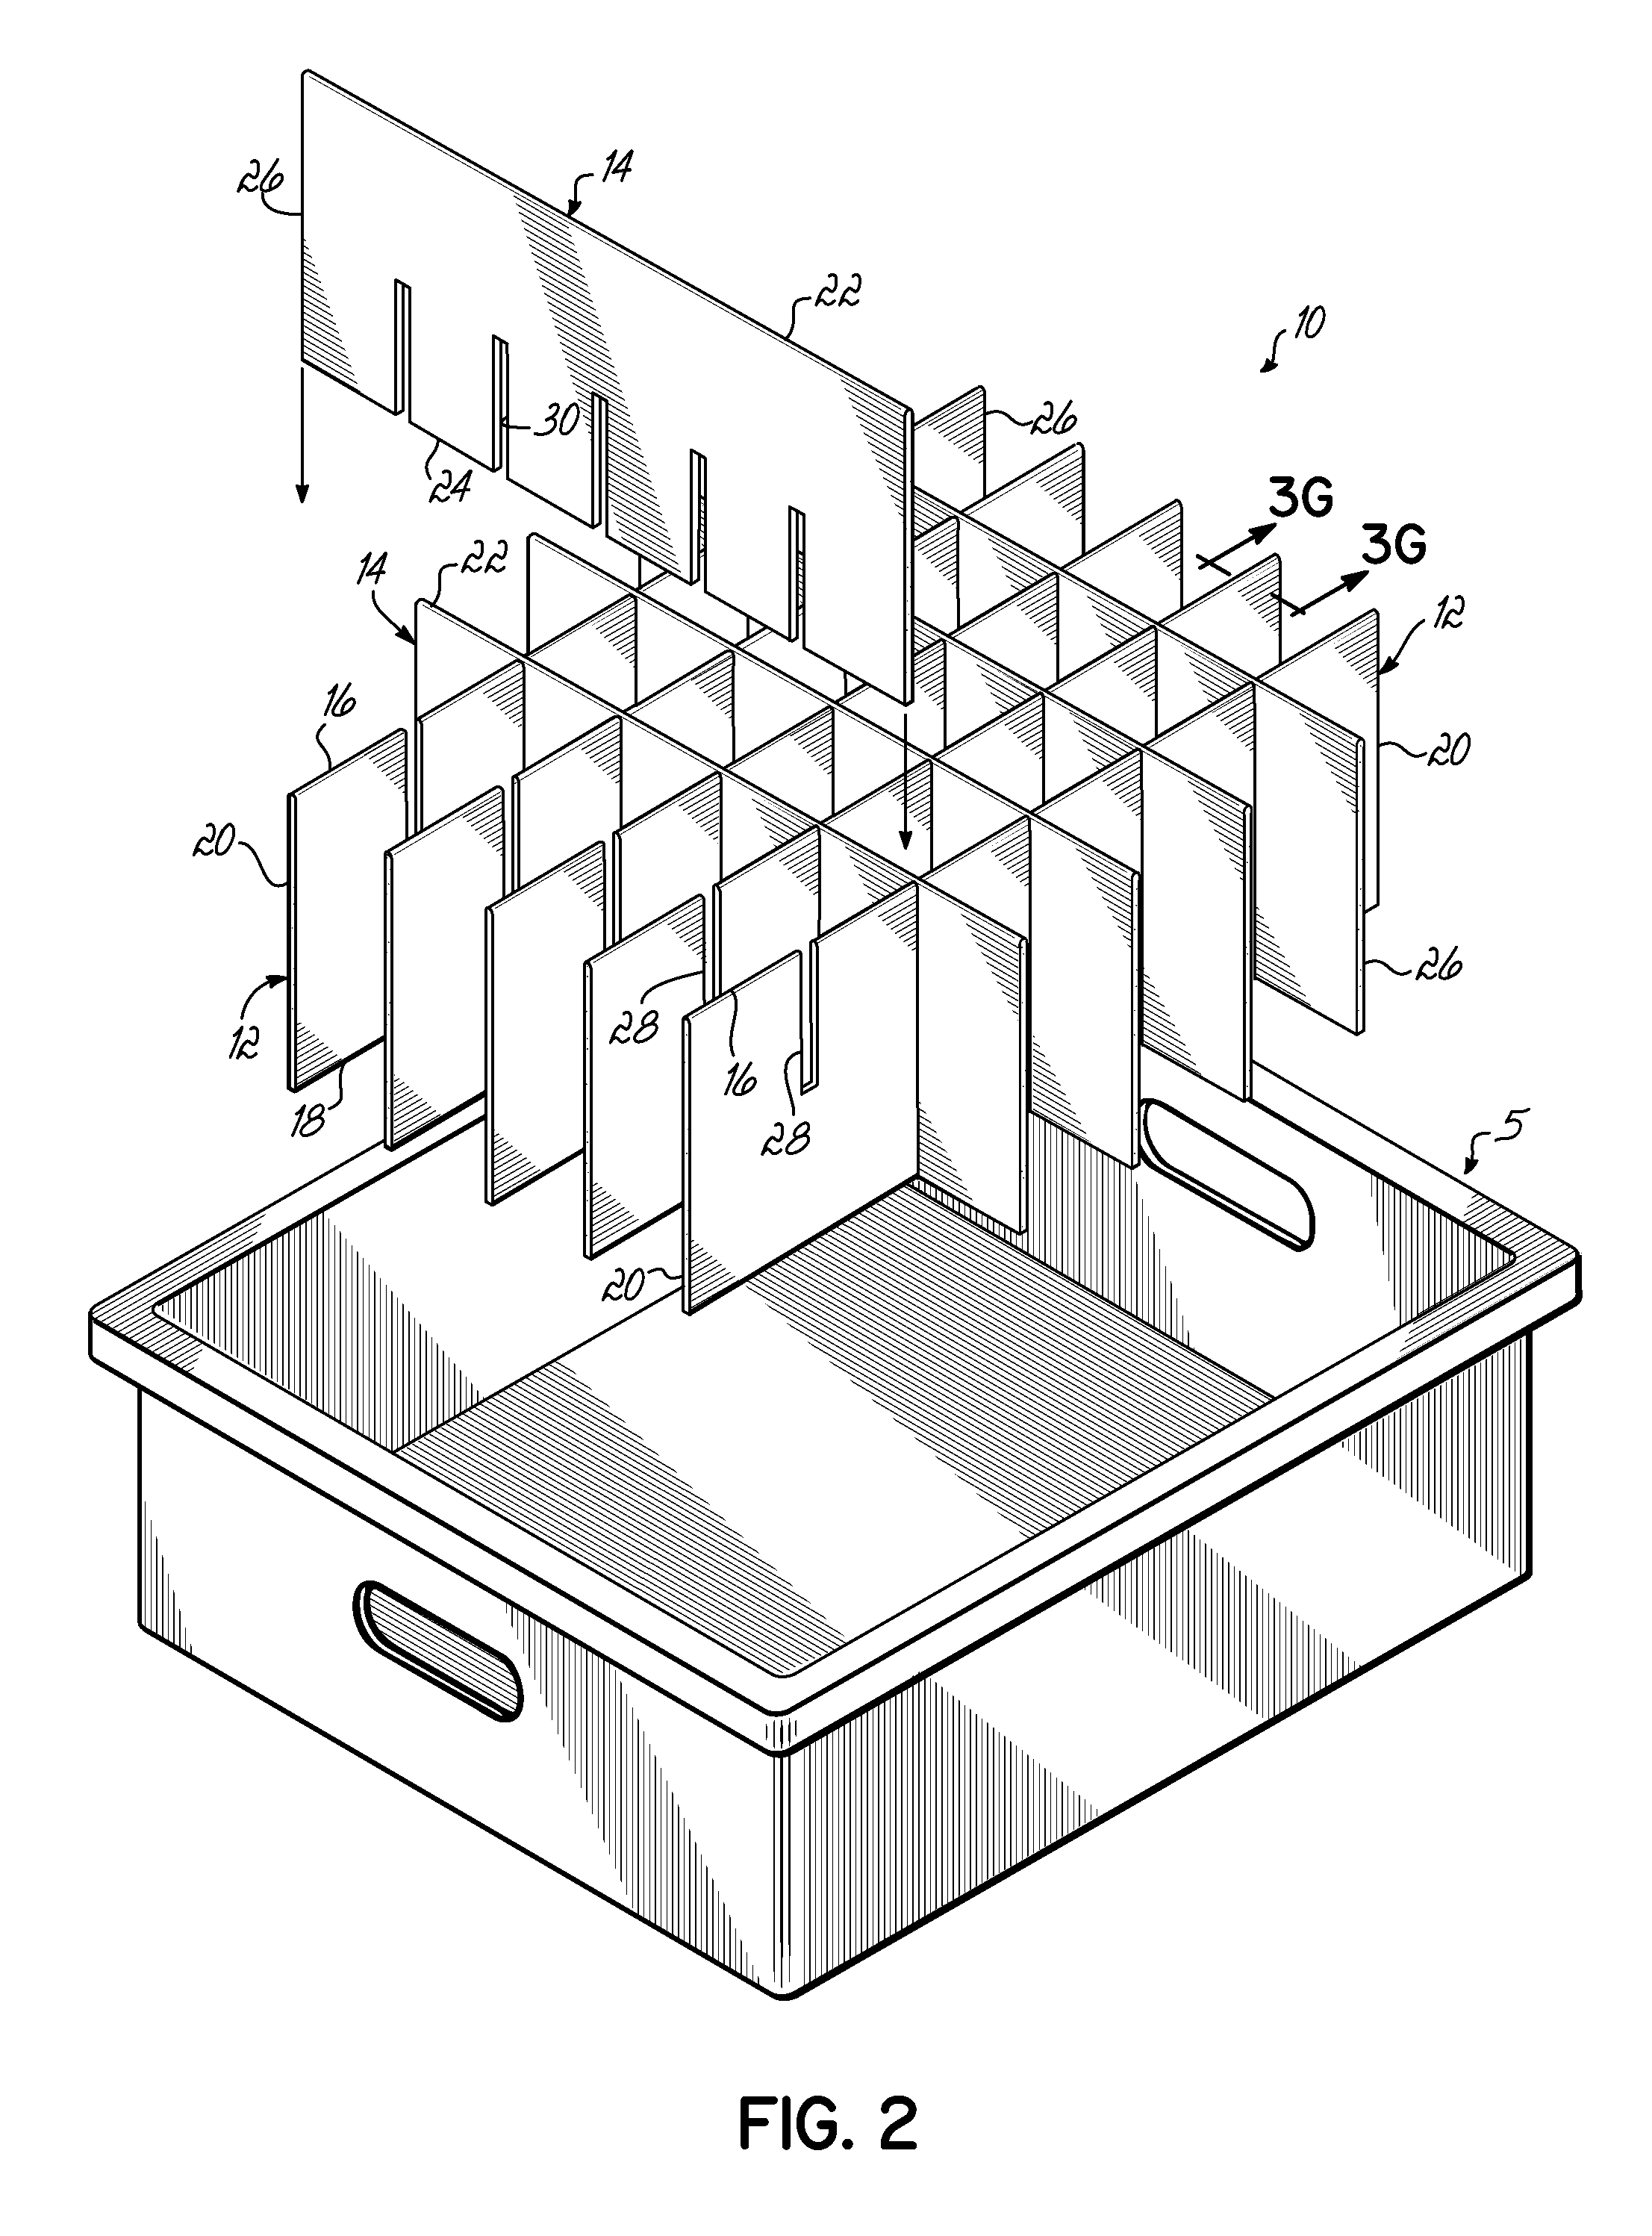 Partition assembly made with partitions having rounded edges and method of making same